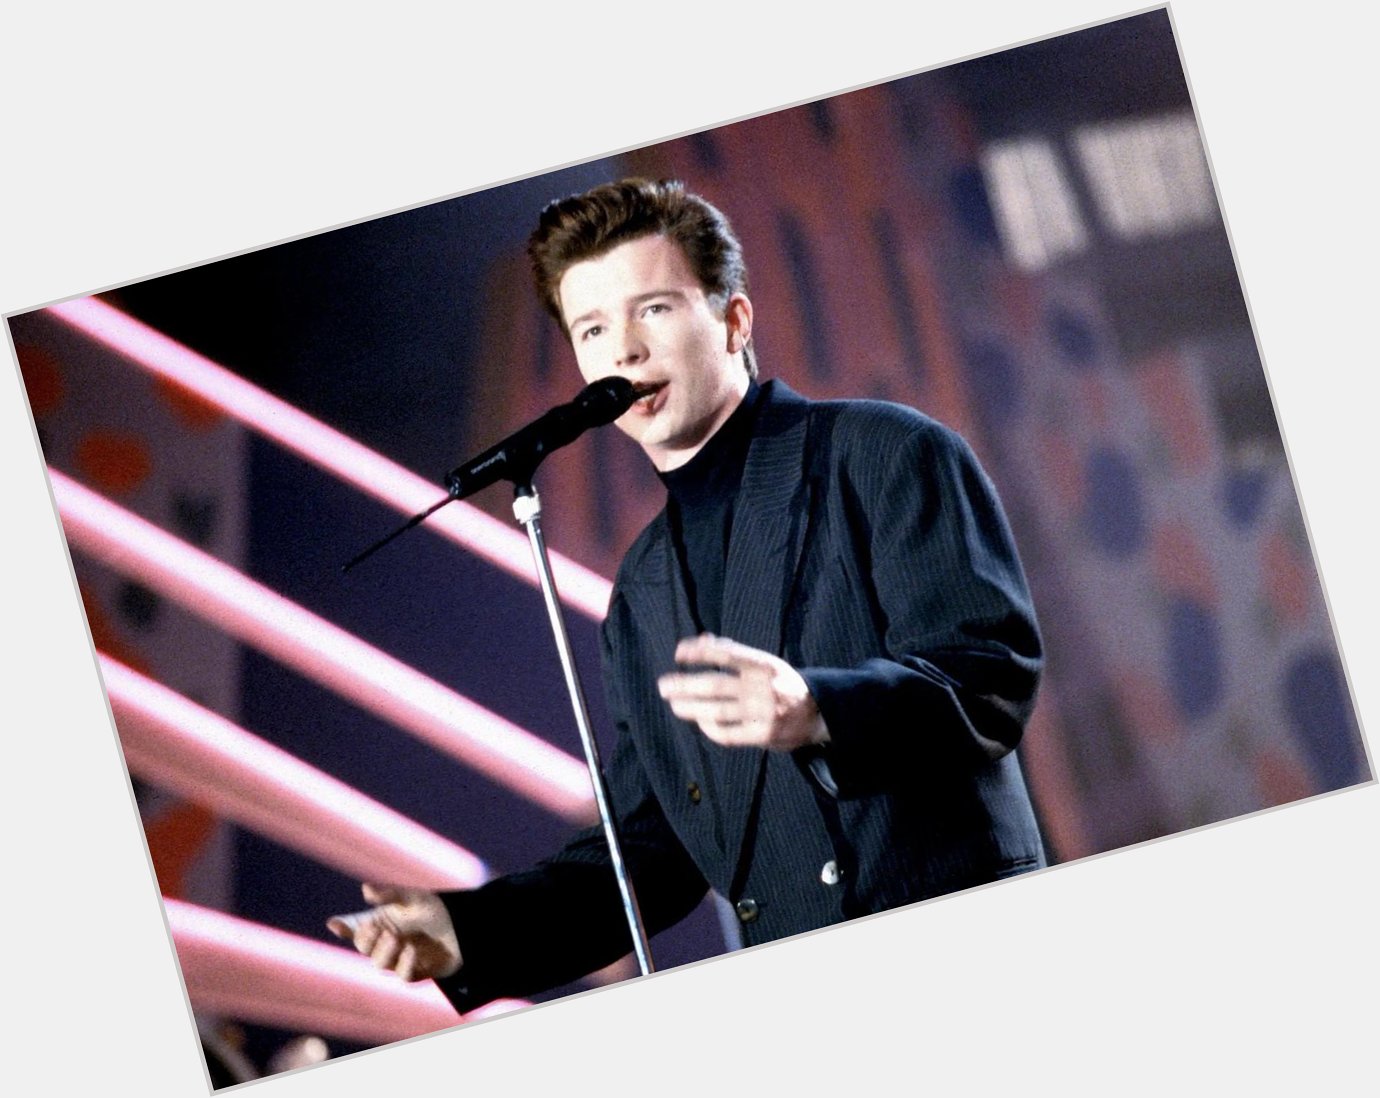 Happy birthday to English singer, songwriter and radio personality Rick Astley, born February 6, 1966. 